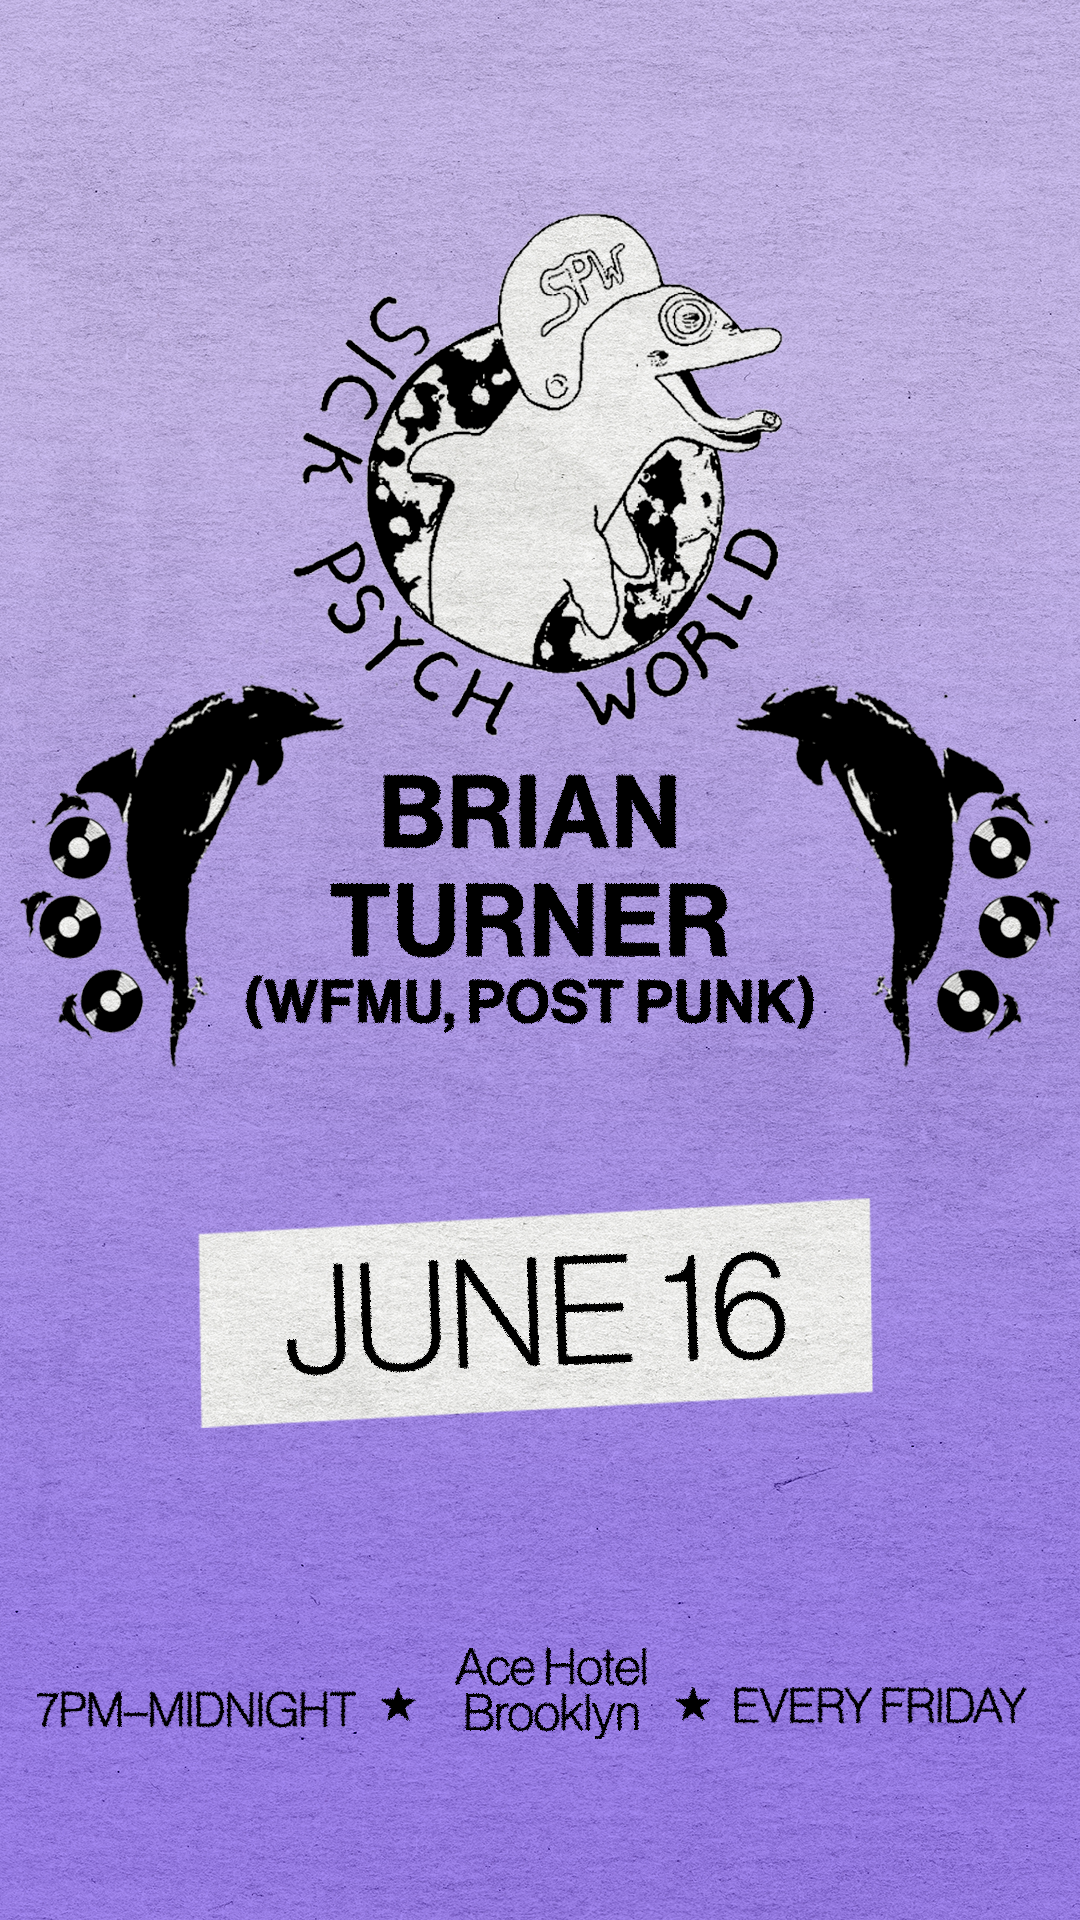 Brian turner promotional flyer for Lobby night